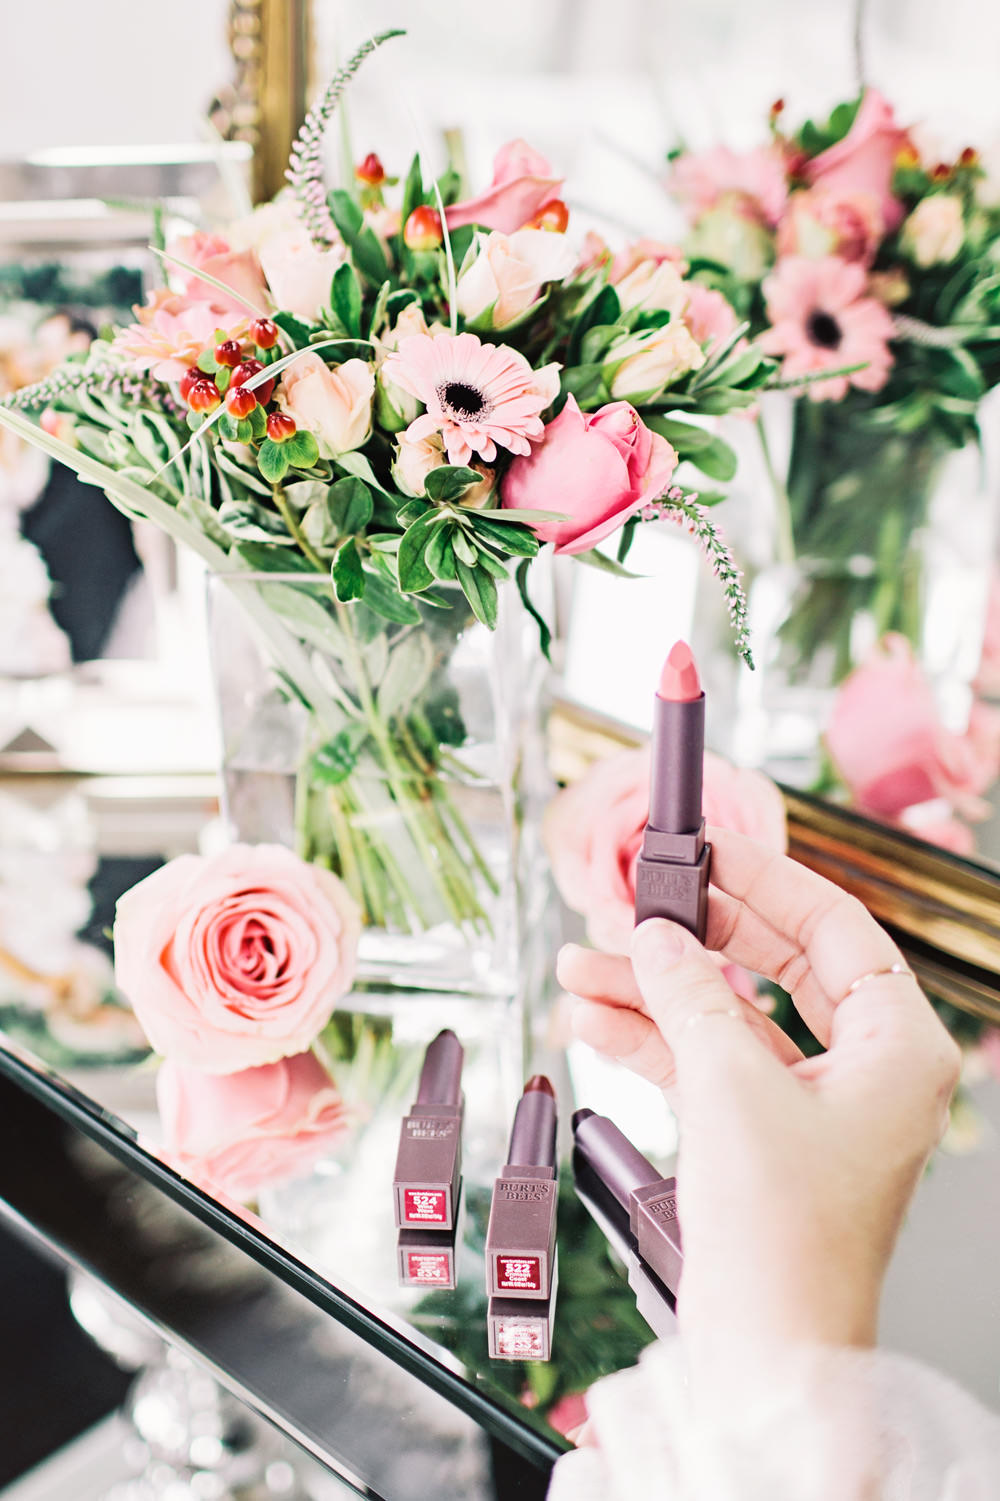 Dash of Darling shares four lipstick shades for spring with Burt's Bees